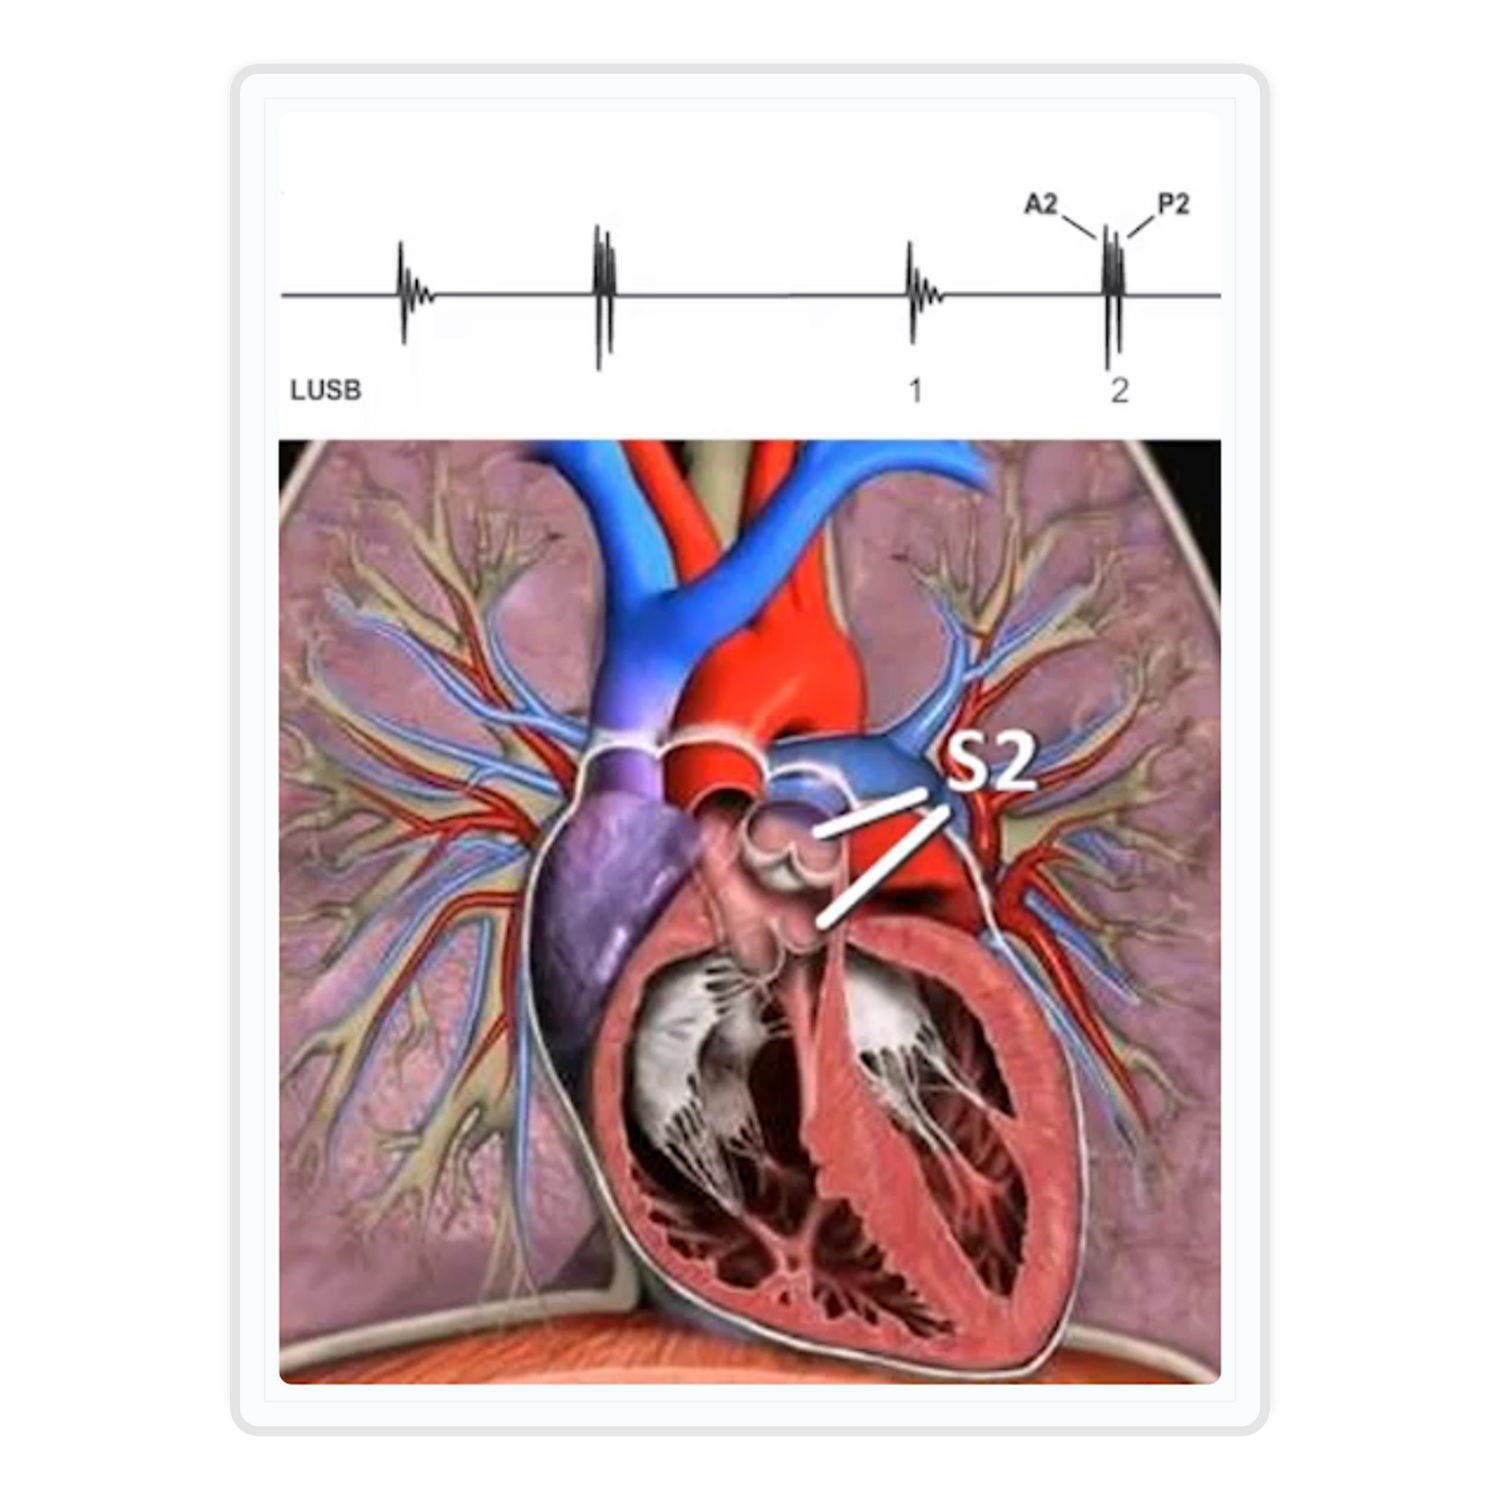 S2 placement on heart anatomy and LUSB